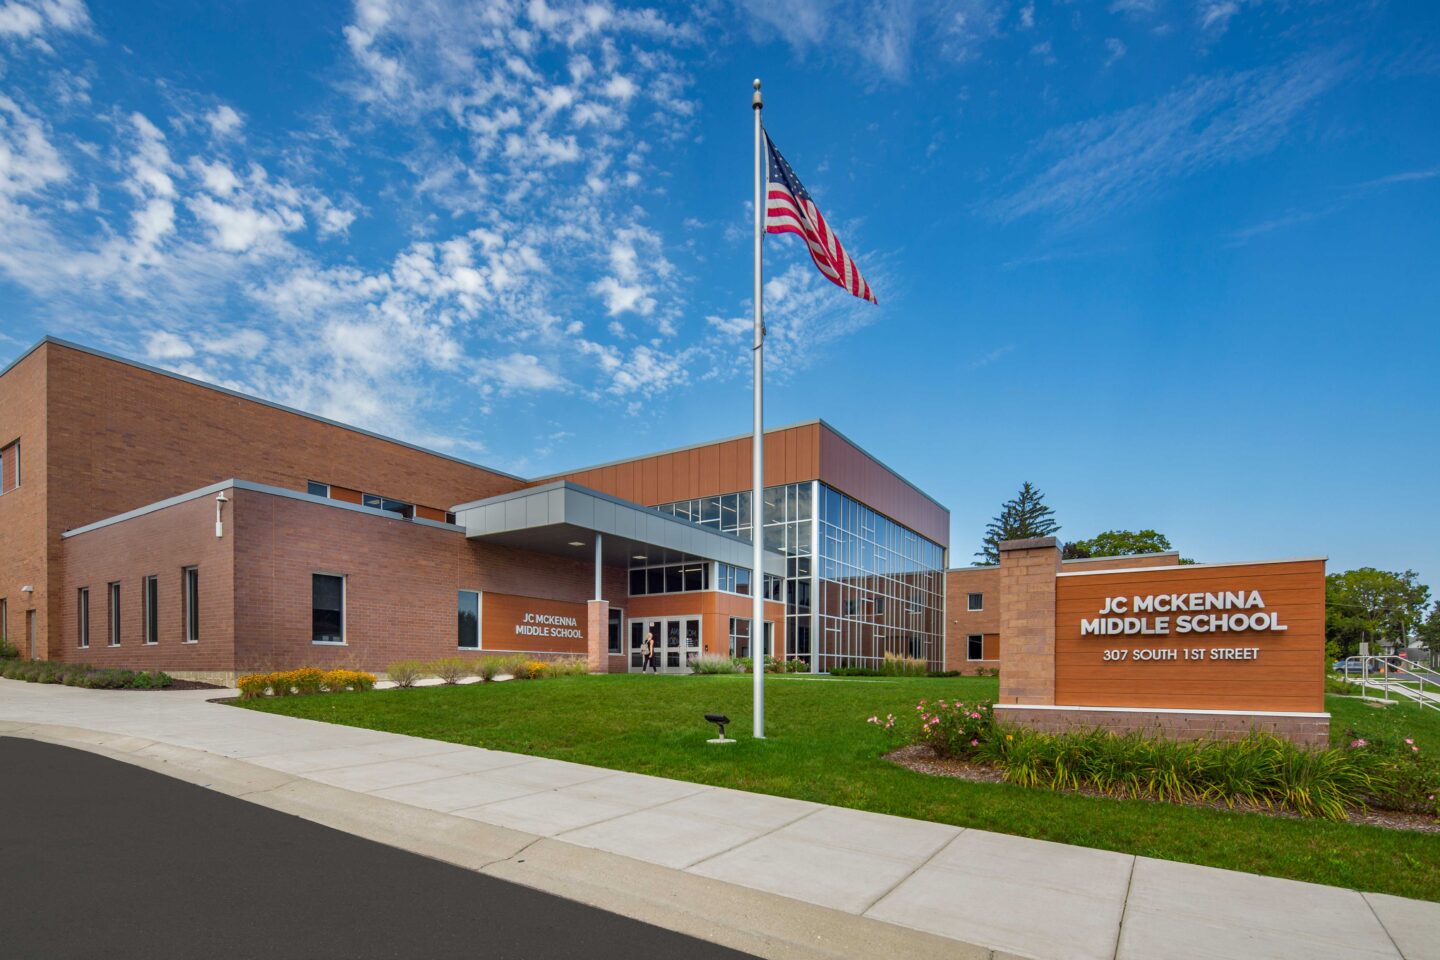 JC McKenna Middle School front of building - main entrance with flag pole